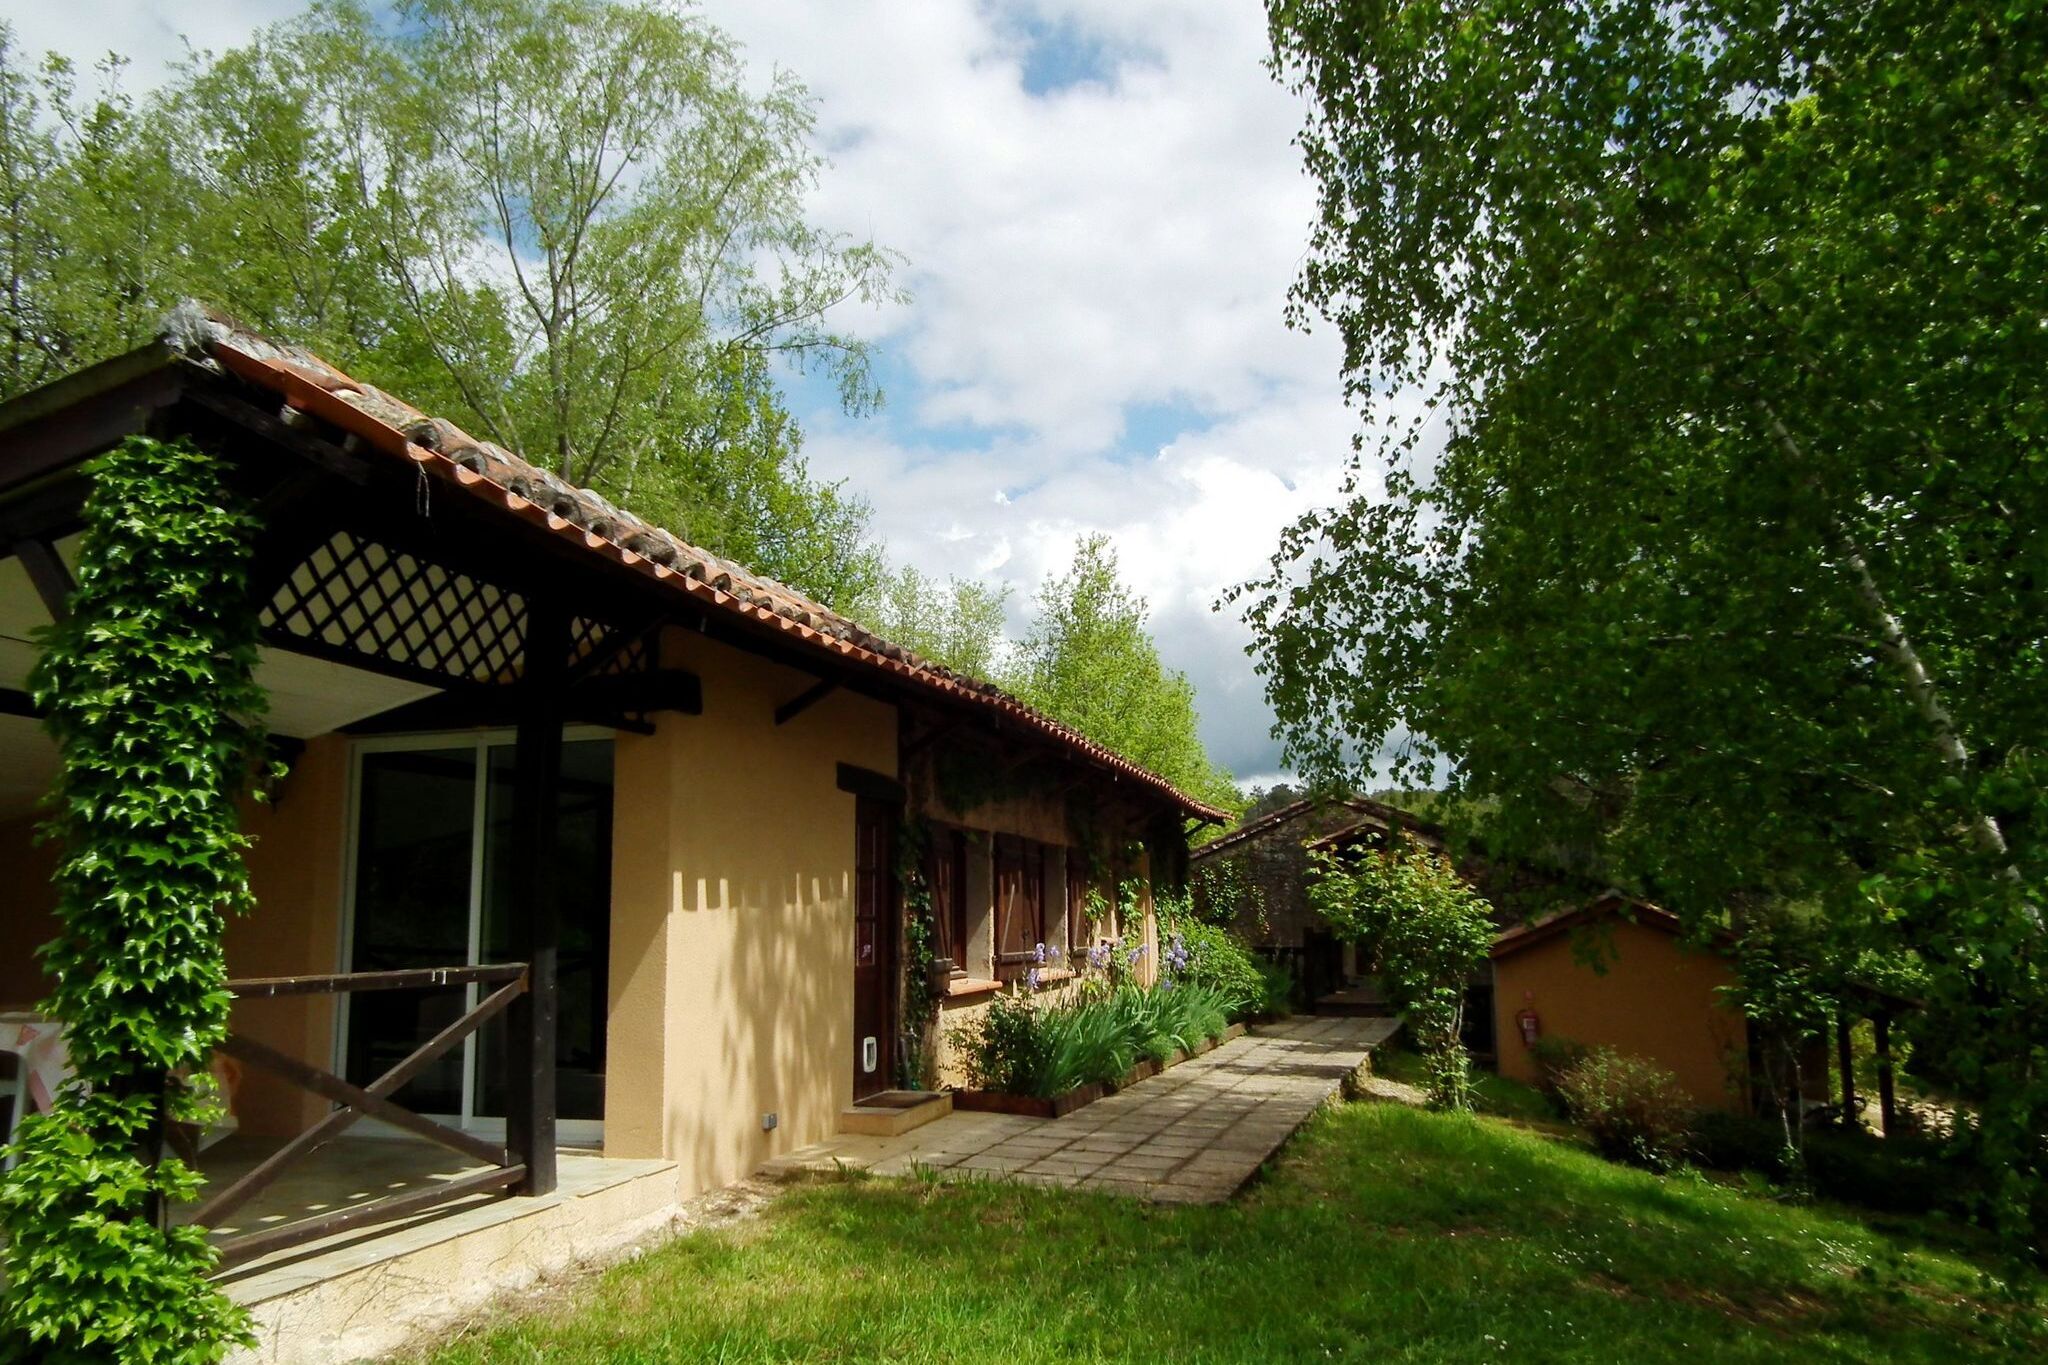 Detached house with terrace in south Dordogne